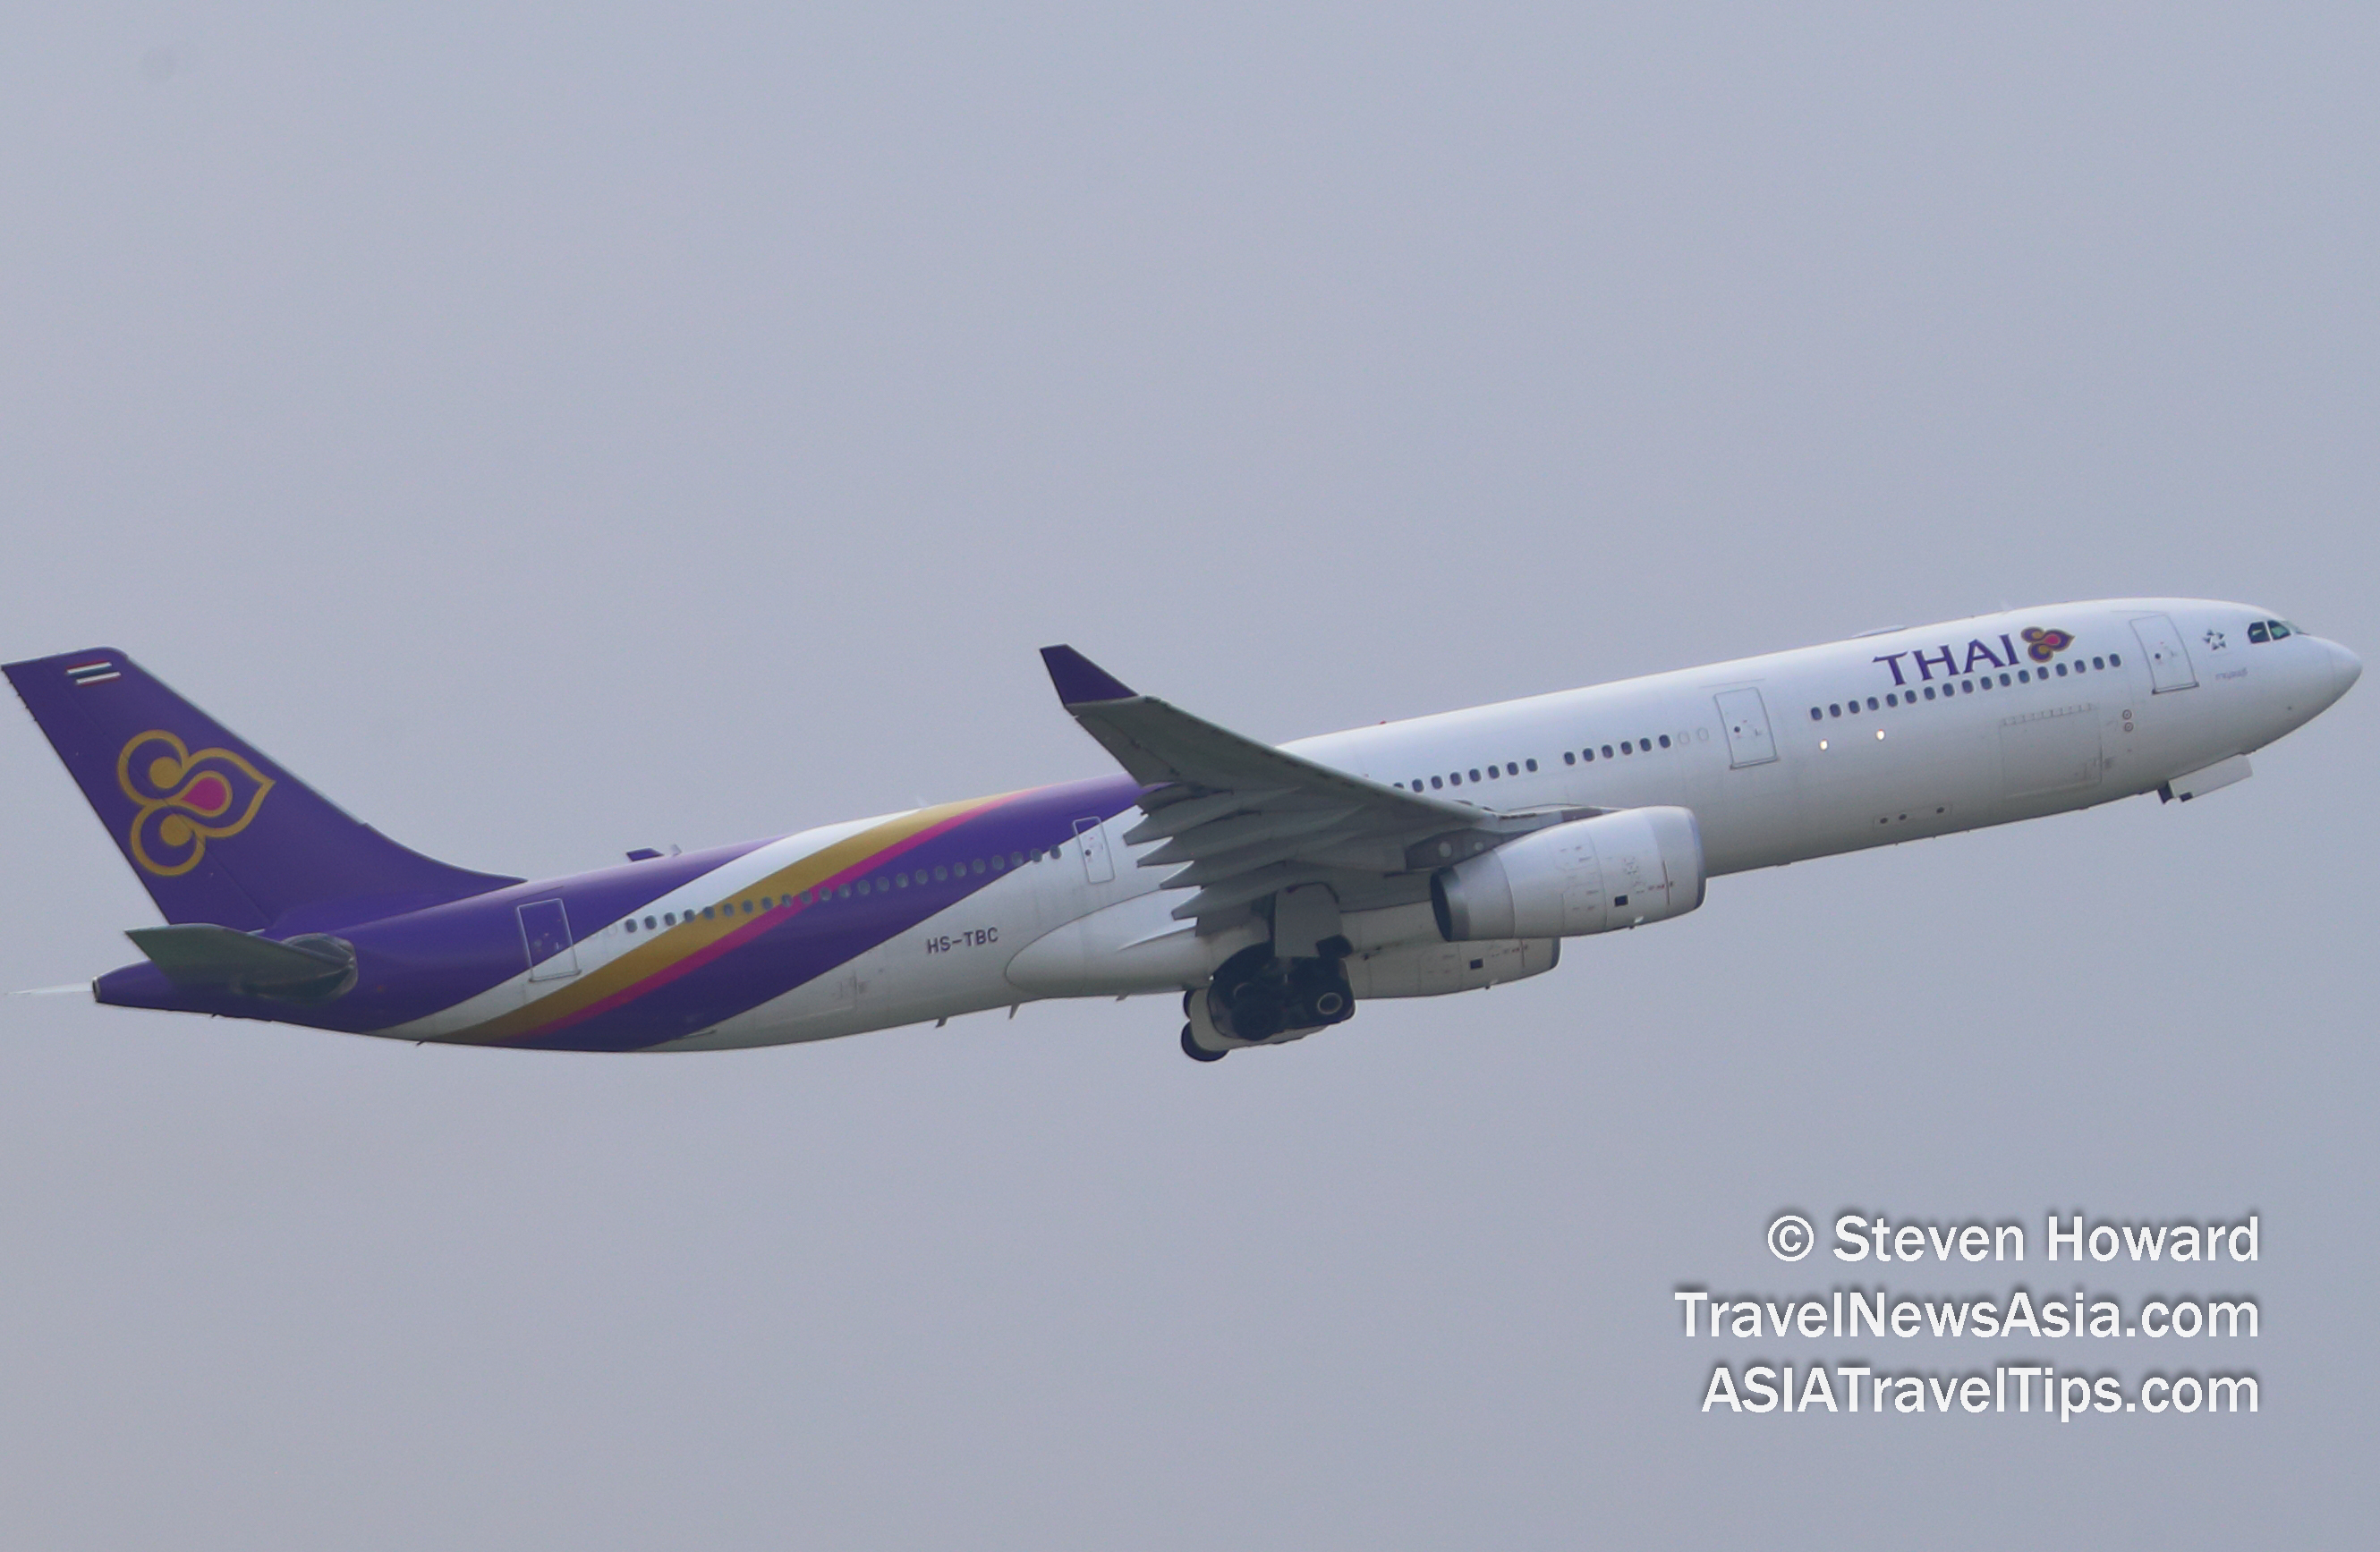 Thai Airways Airbus A330 reg: HS-TBC. Picture by Steven Howard of TravelNewsAsia.com Click to enlarge.